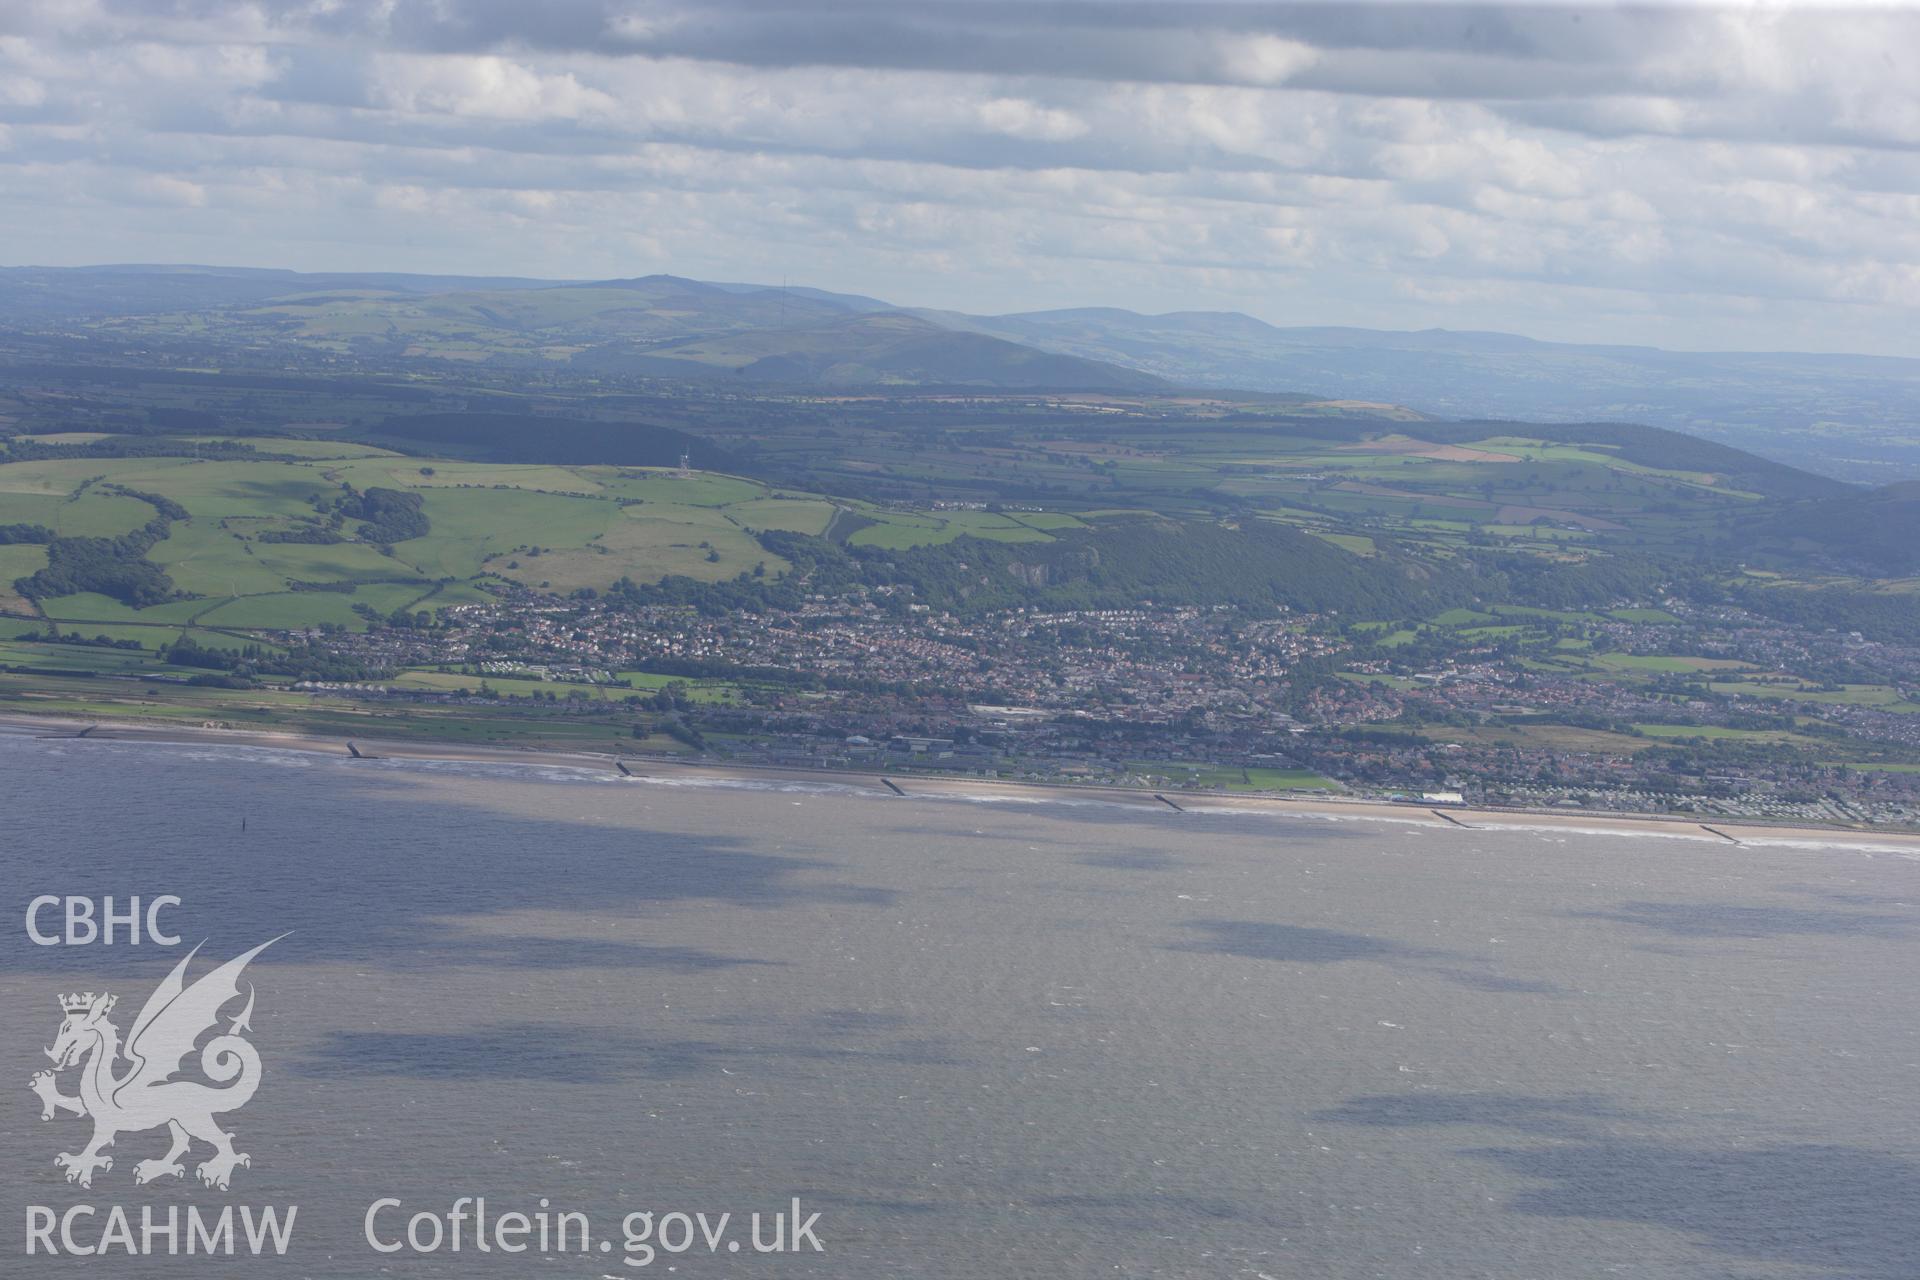 RCAHMW colour oblique aerial photograph of Prestatyn and the coast. Taken on 30 July 2009 by Toby Driver